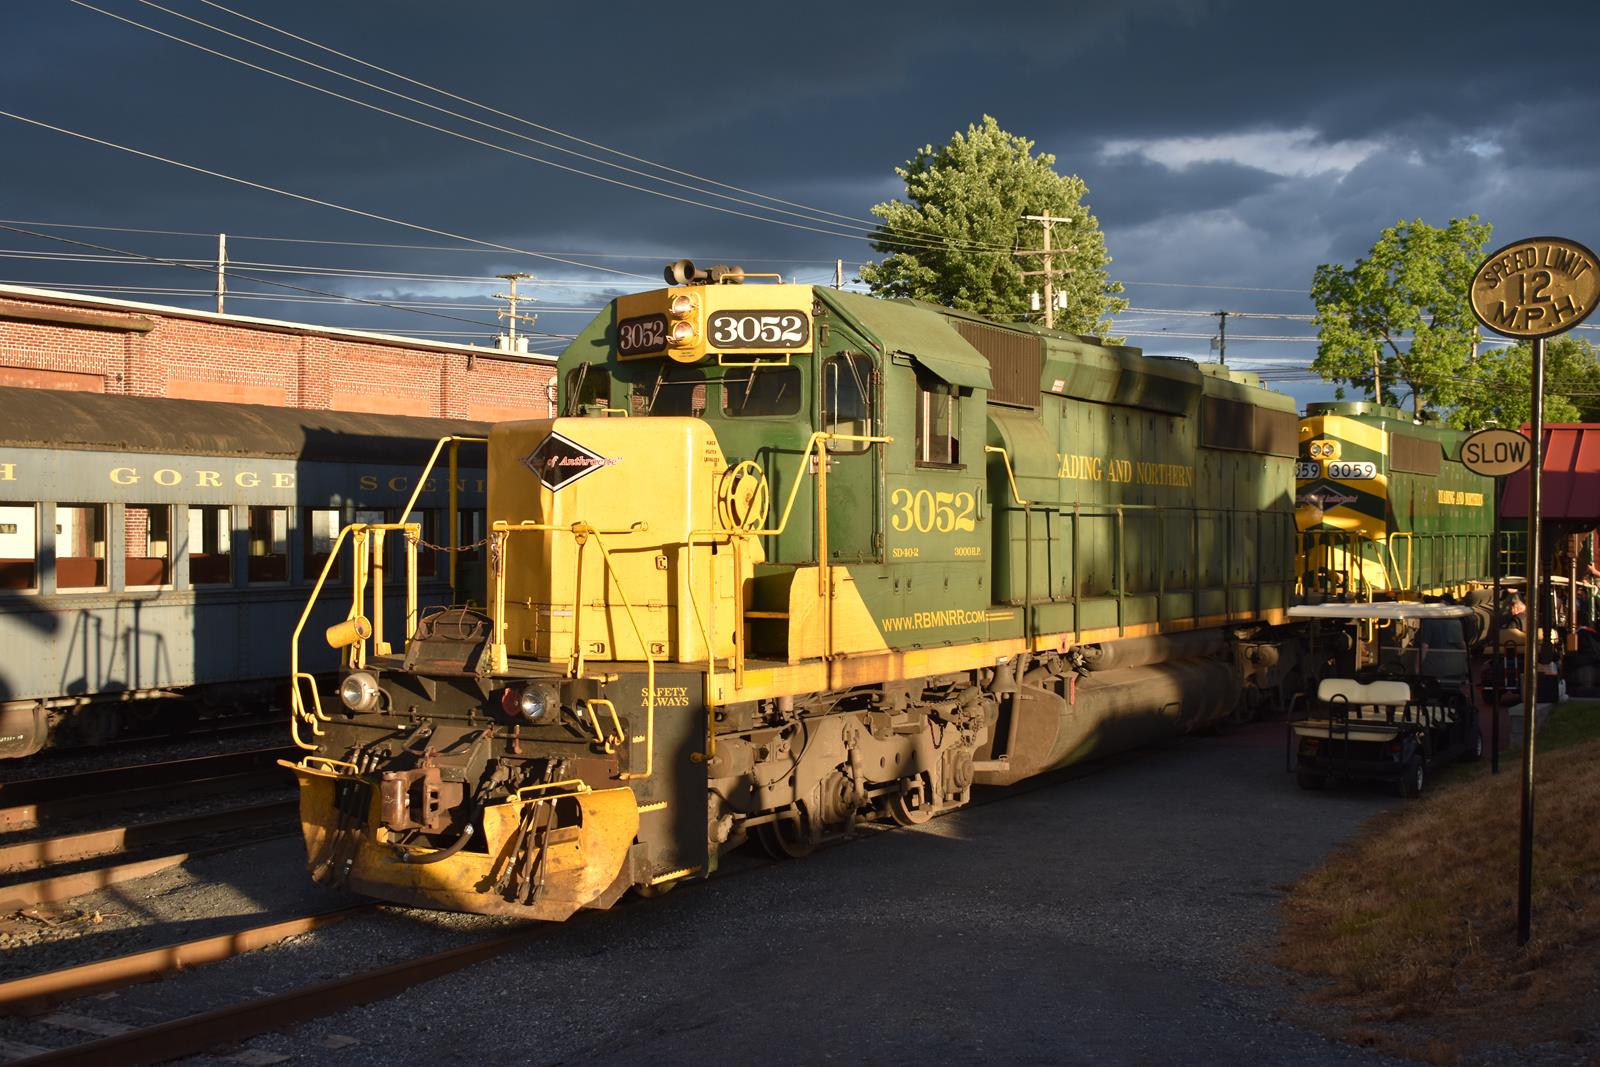 RBMN 3052 is a class SD40-2 and  is pictured in Reading, Pennsylvania, USA.  This was taken along the Reading Line on the Reading Blue Mountain and Northern Railroad. Photo Copyright: James Ellison uploaded to Railroad Gallery on 11/28/2022. This photograph of RBMN 3052 was taken on Saturday, May 28, 2022. All Rights Reserved. 